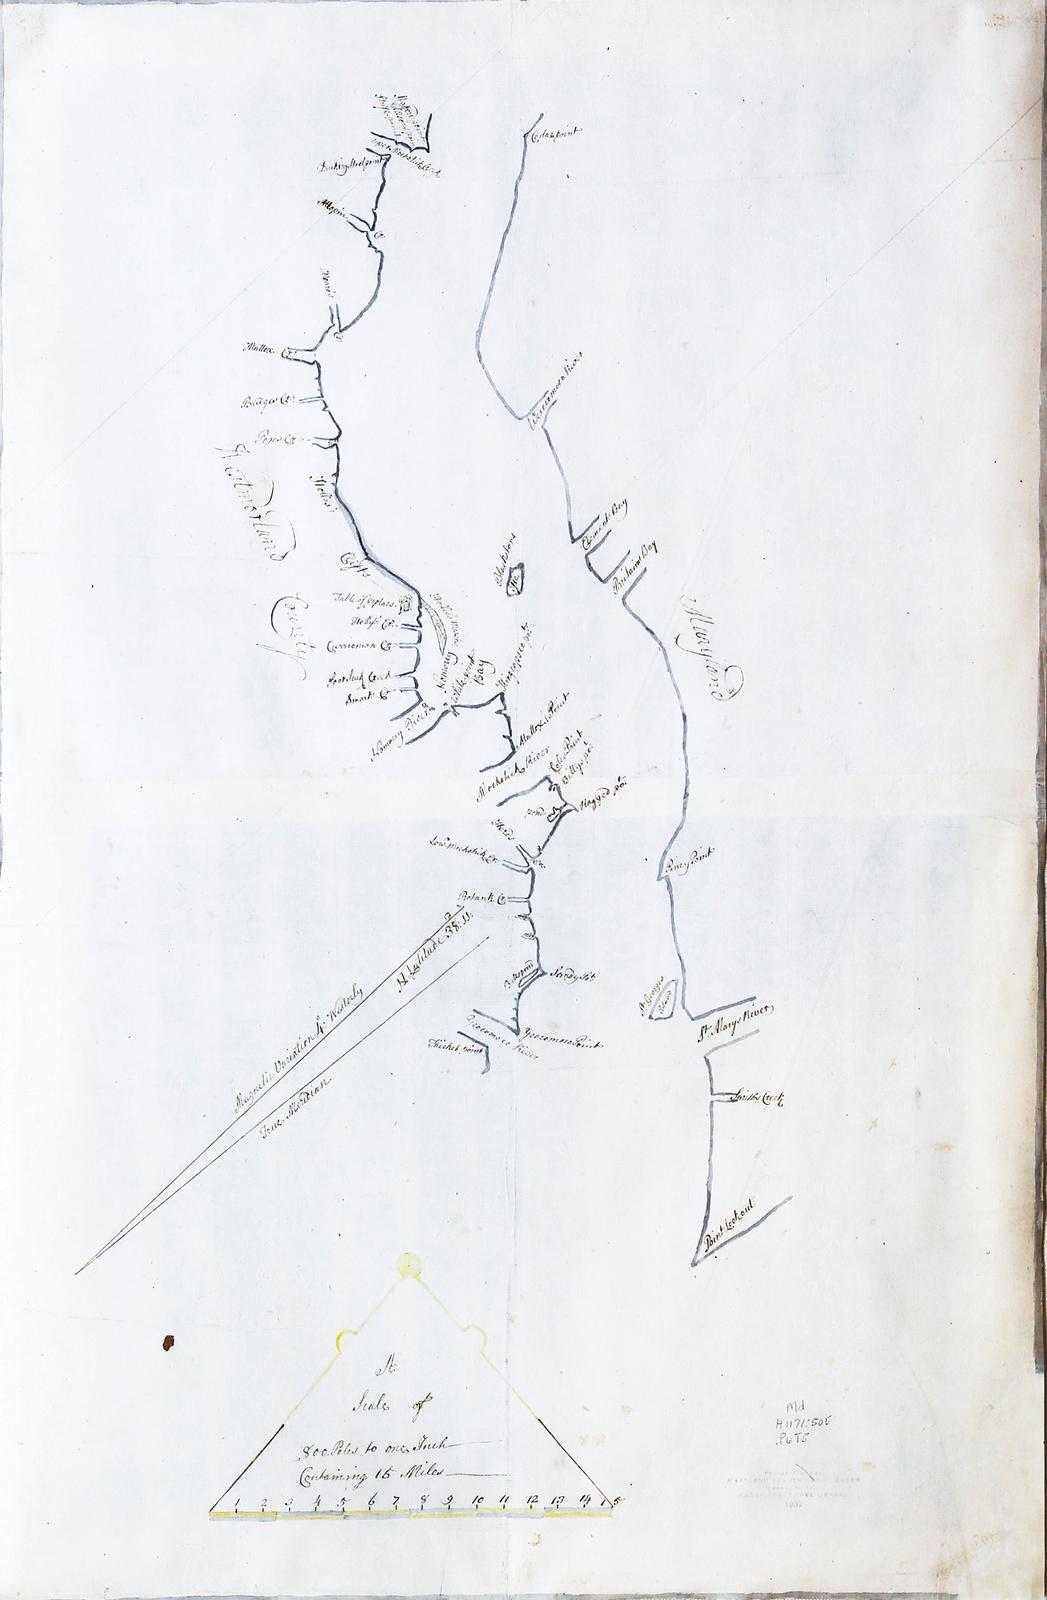 FAIRFAX DOCUMENTS, 3 Manuscript Maps delineating the Land of Lord Thomas sixth Lord Fairfax of Cameron (1693-1781)